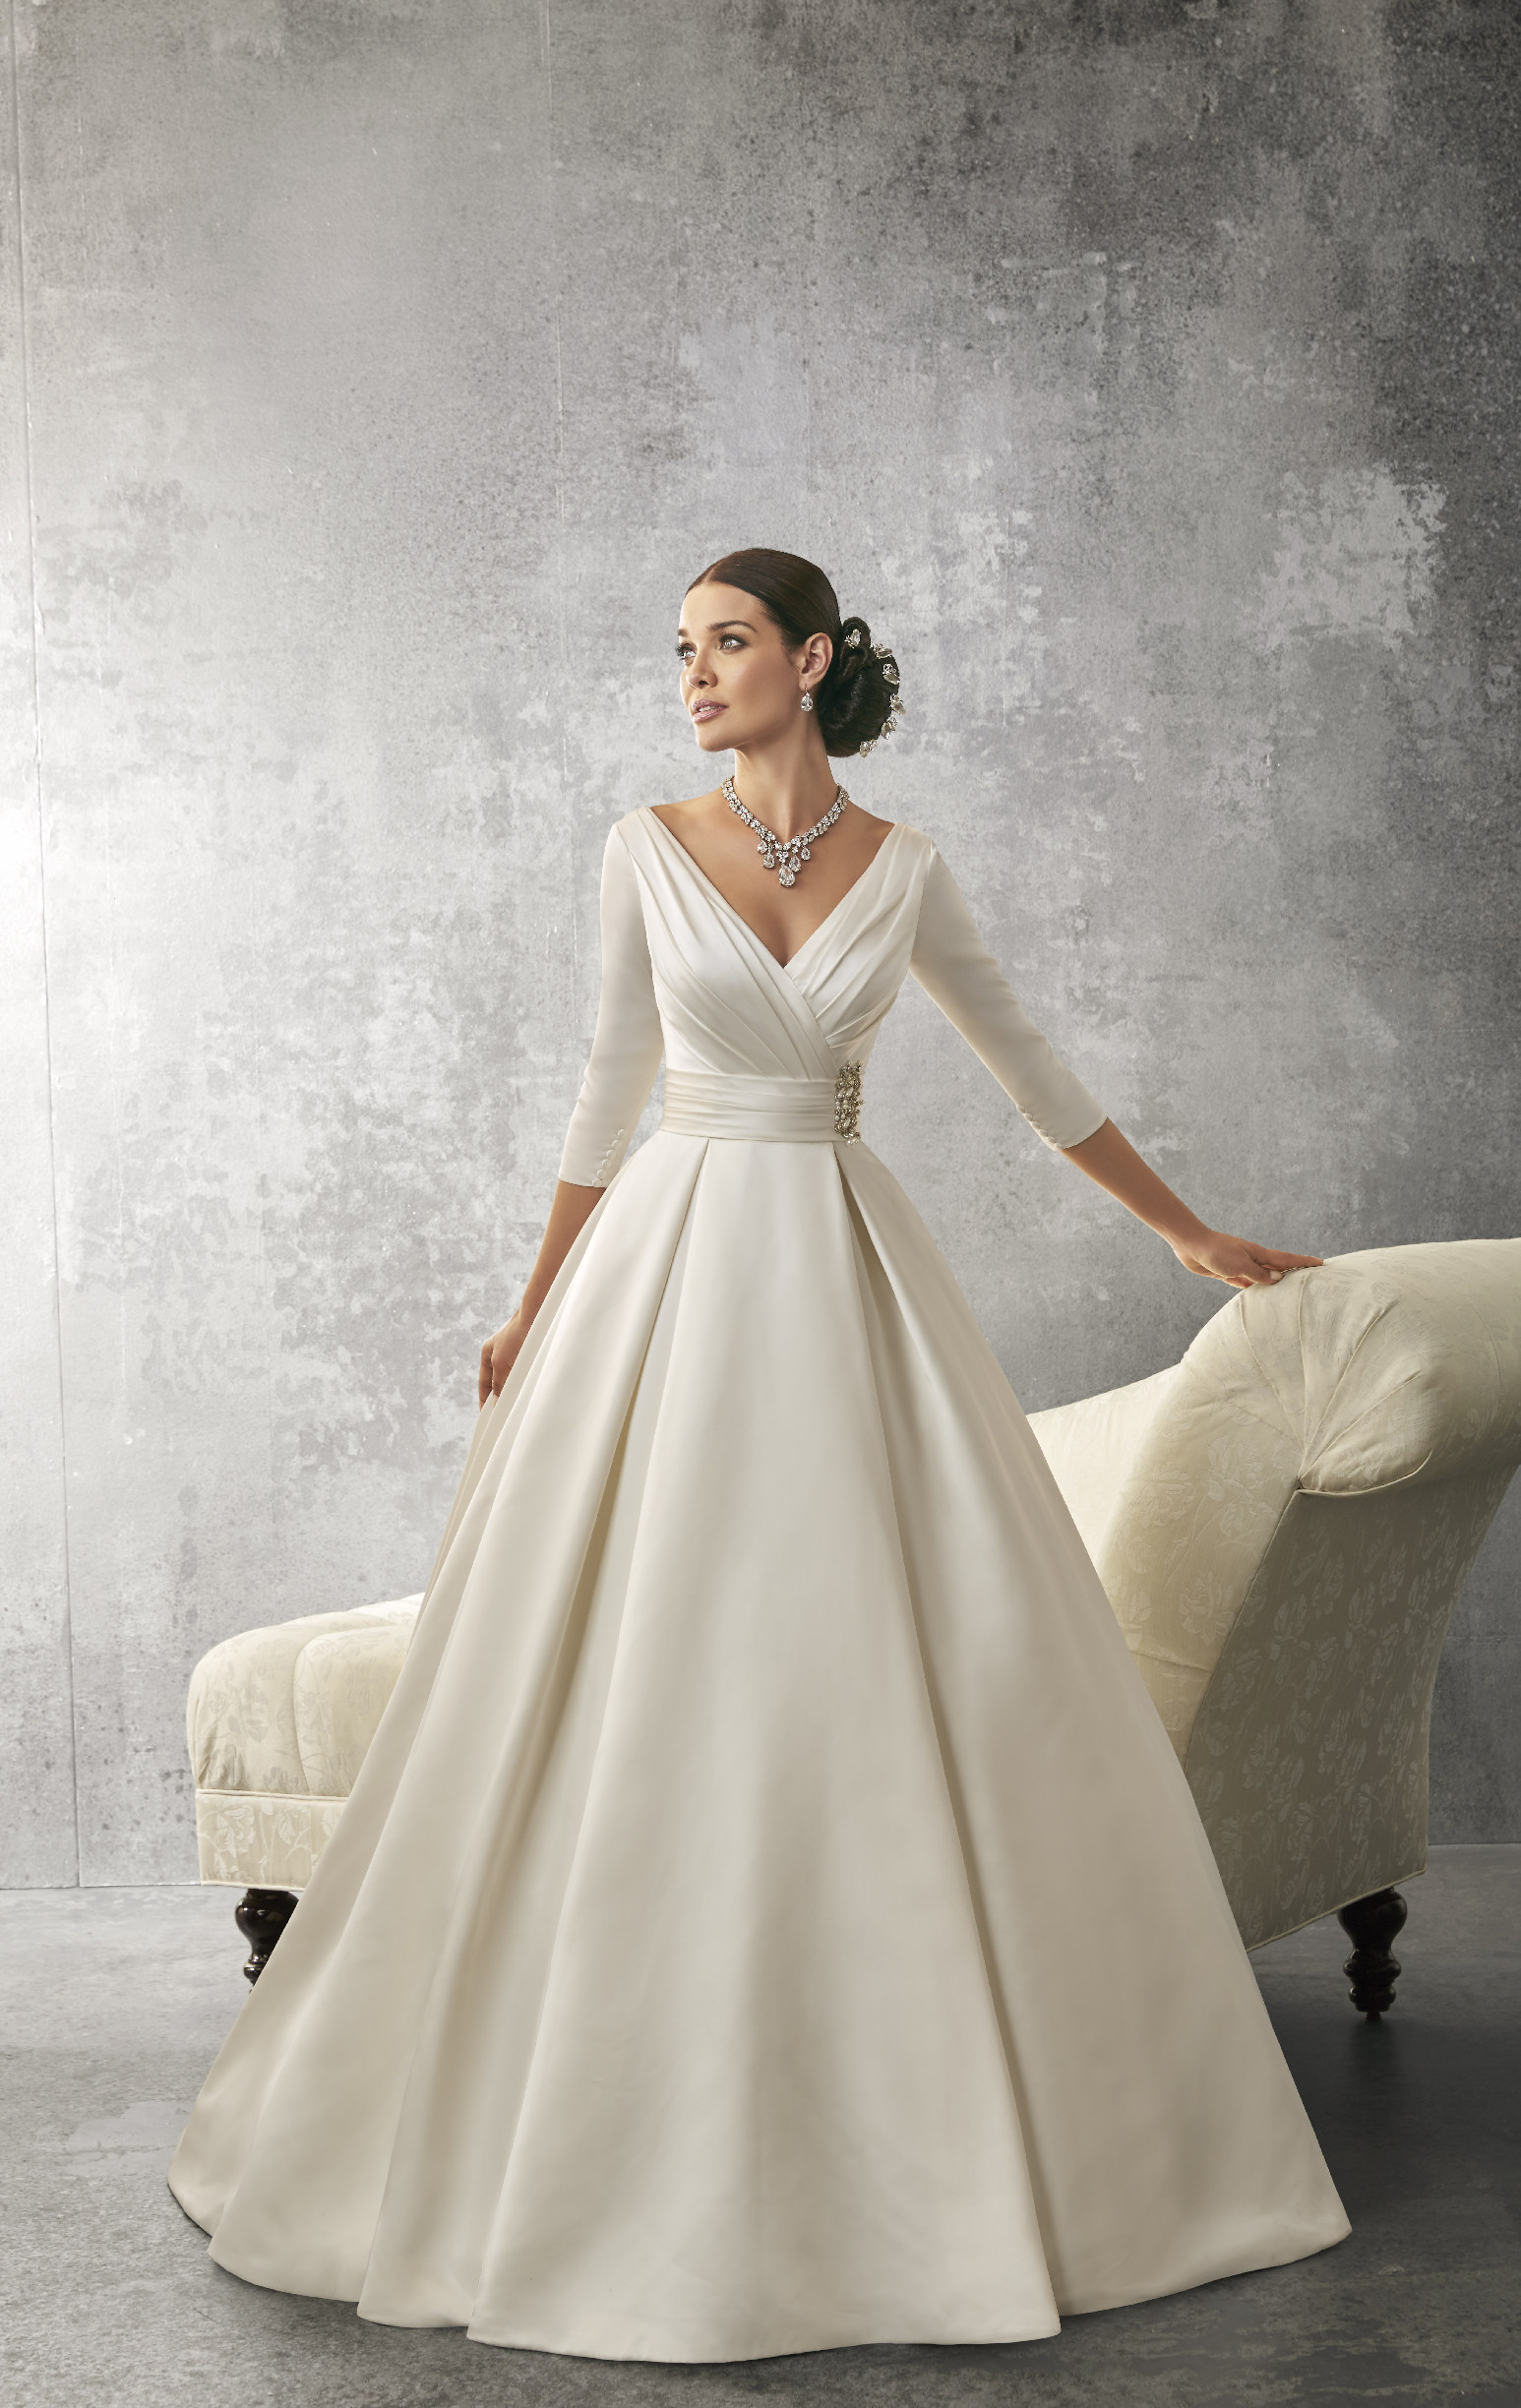 Brunette model stood in front of a cream chaise lounge in Ronald Joyce 69155, an ivory satin ballgown with ¾ sleeves, a v-neckline, and a ruched bodice and waistband with brooch